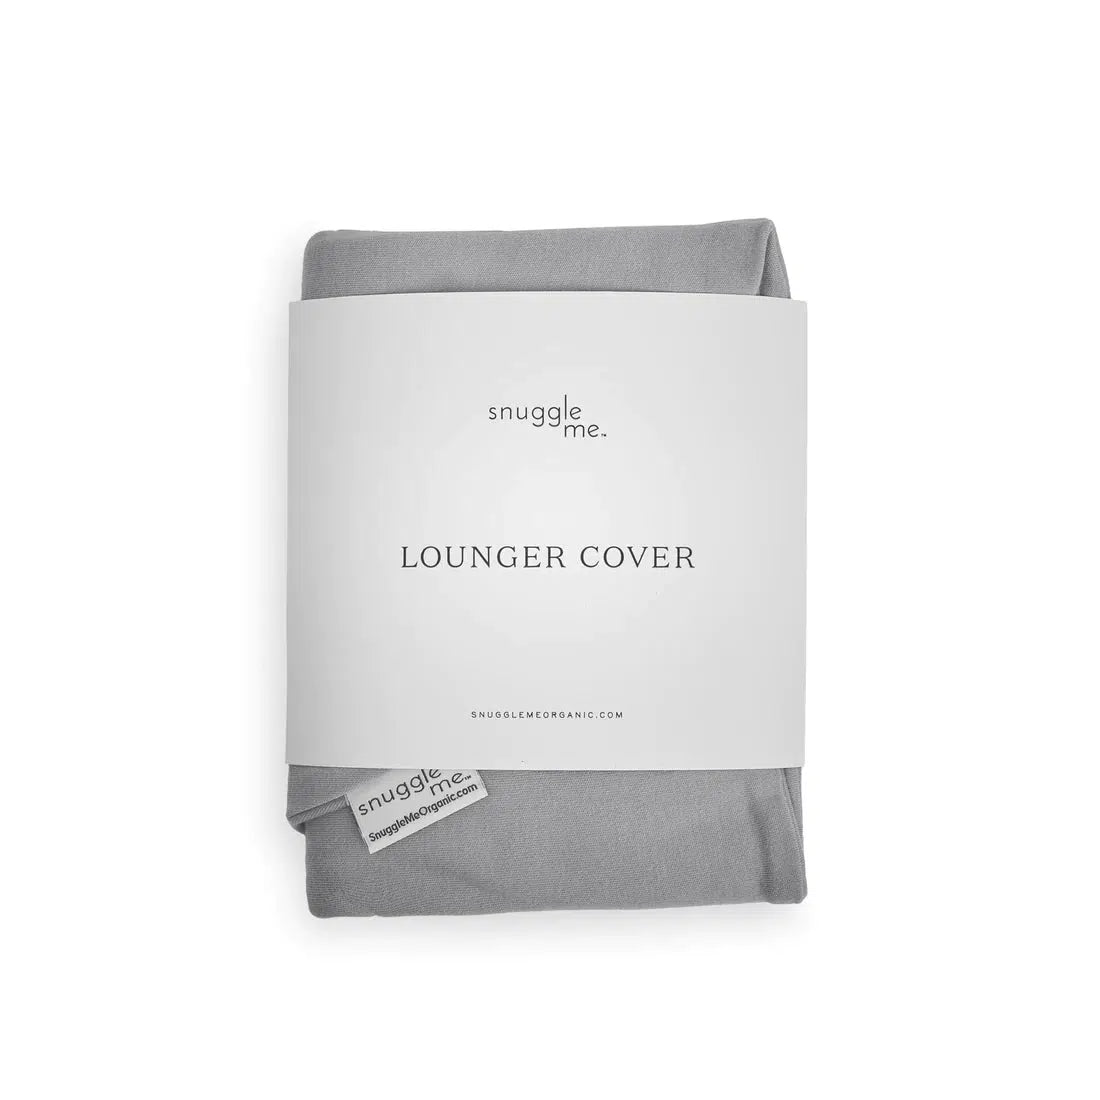 An image of the Snuggle Me Lounger Cover on a white surface.